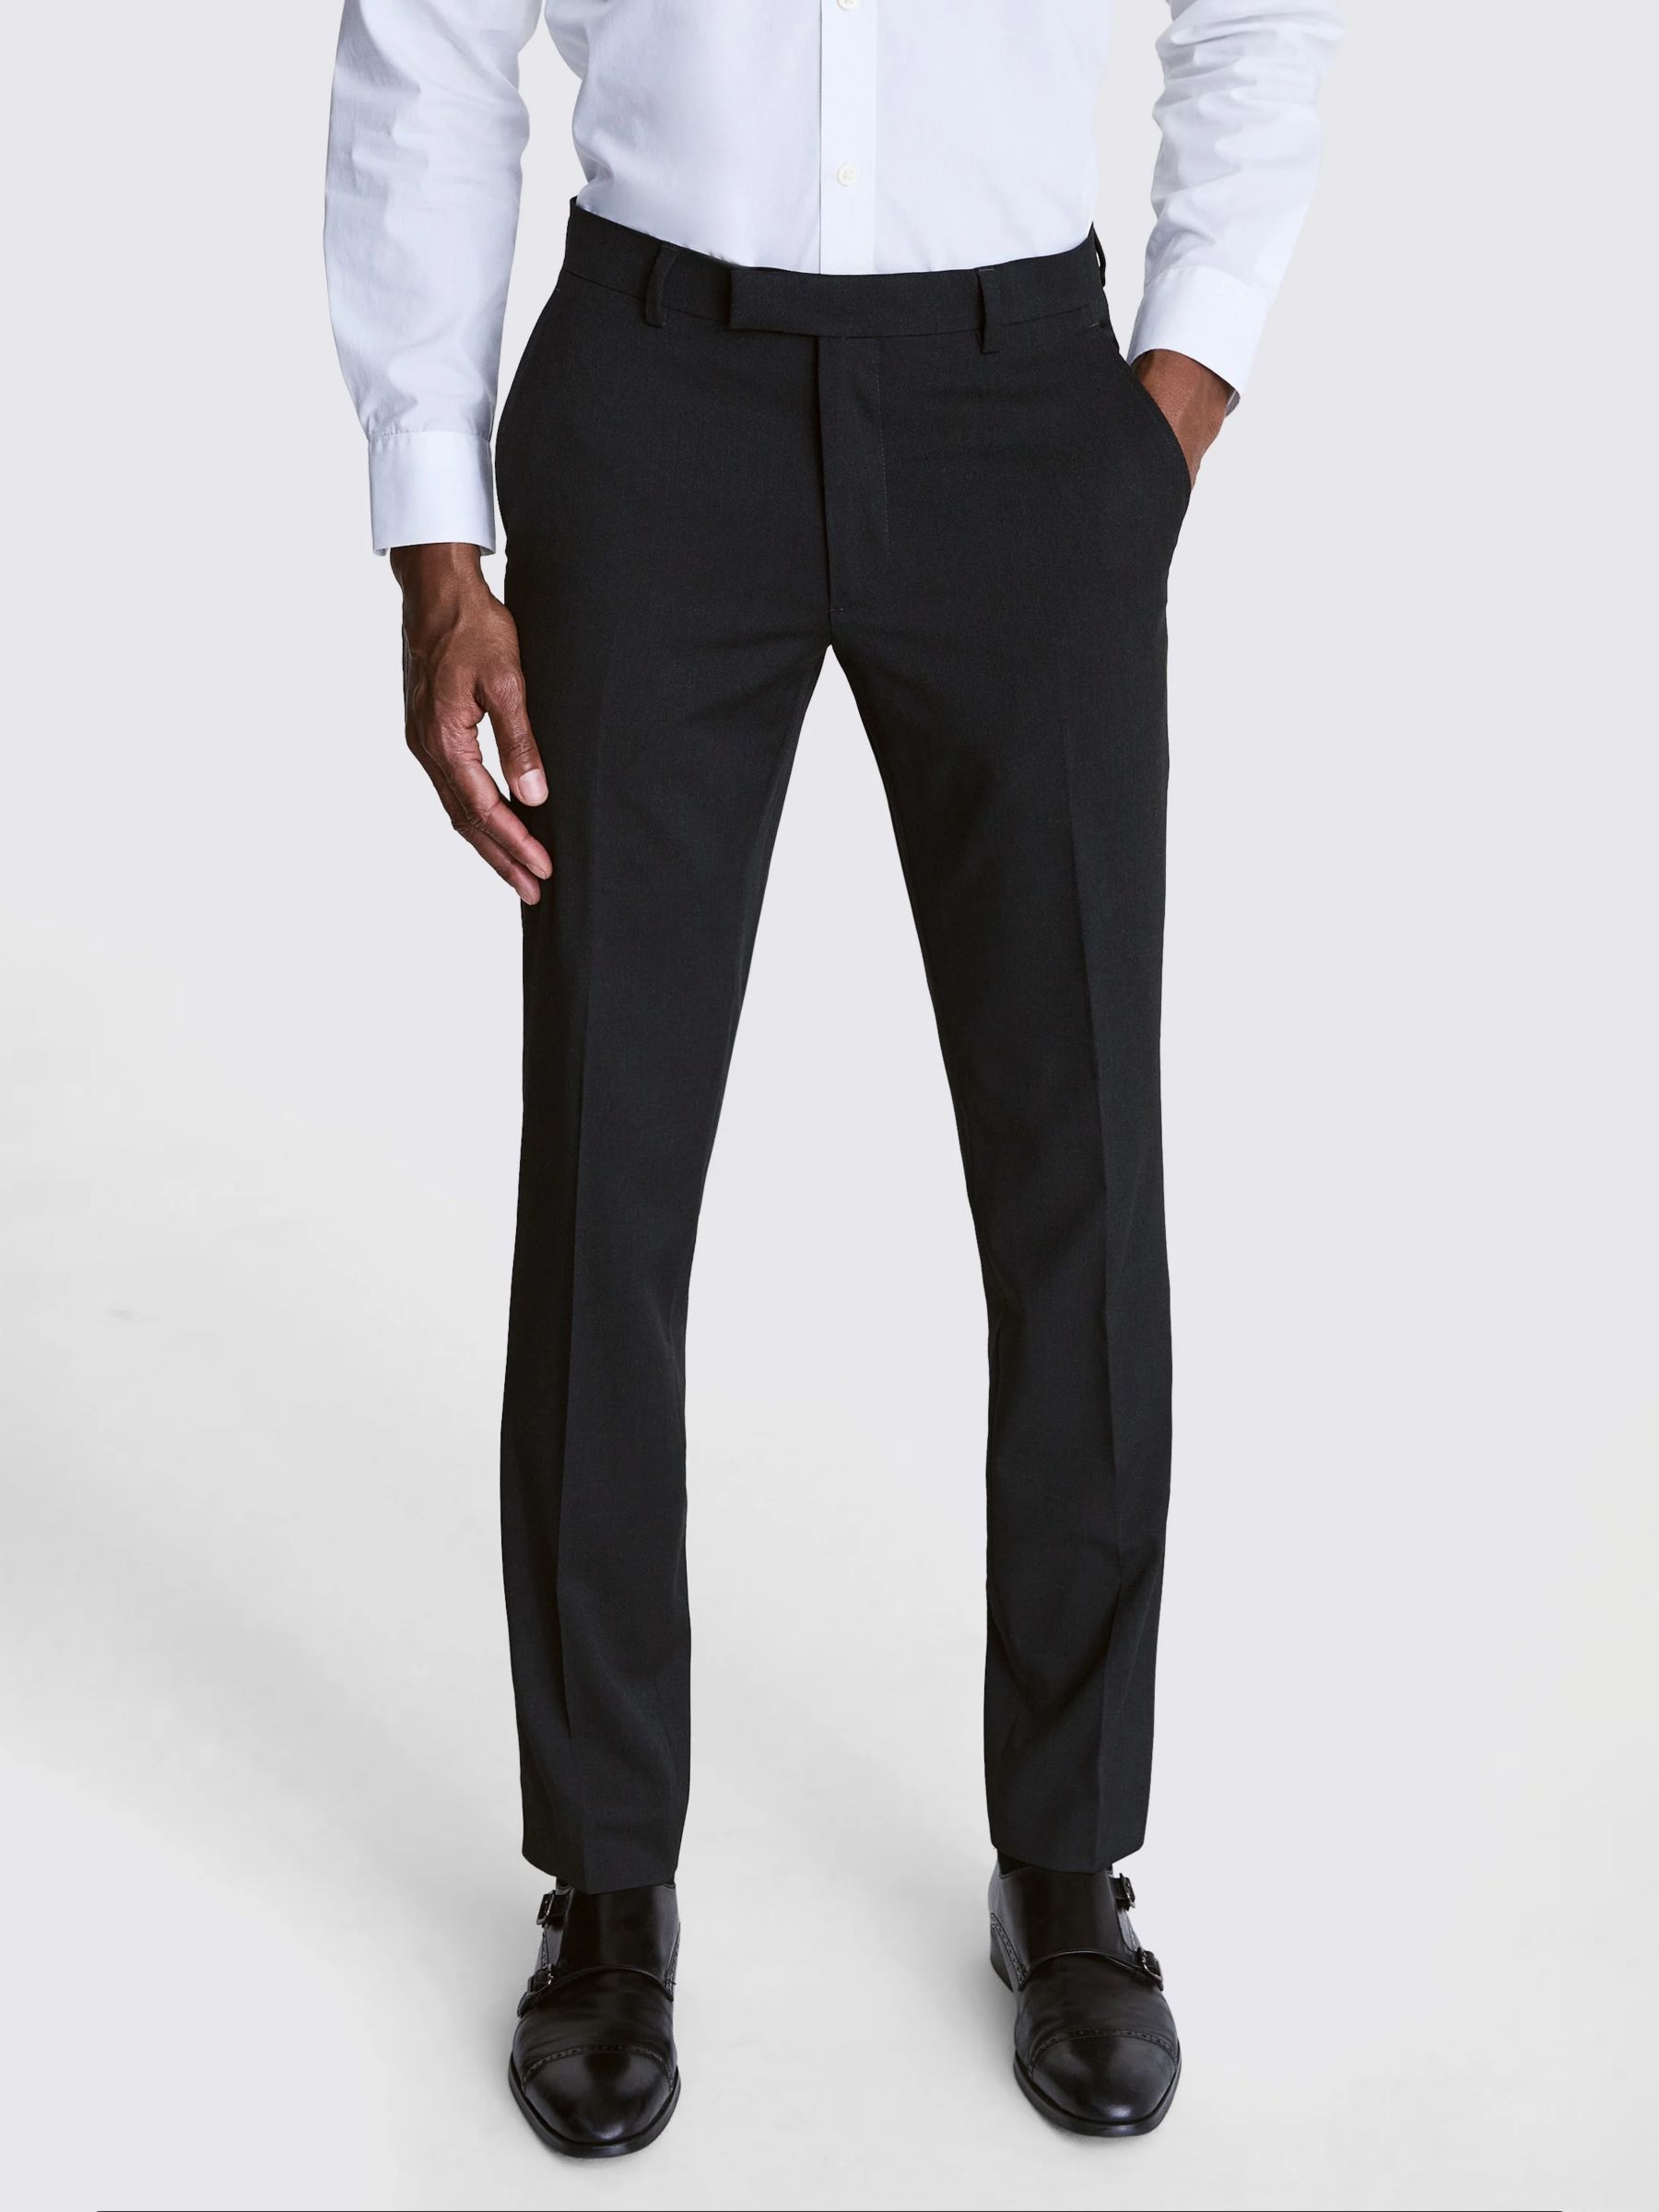 Moss Slim Fit Stretch Trousers, Charcoal at John Lewis & Partners